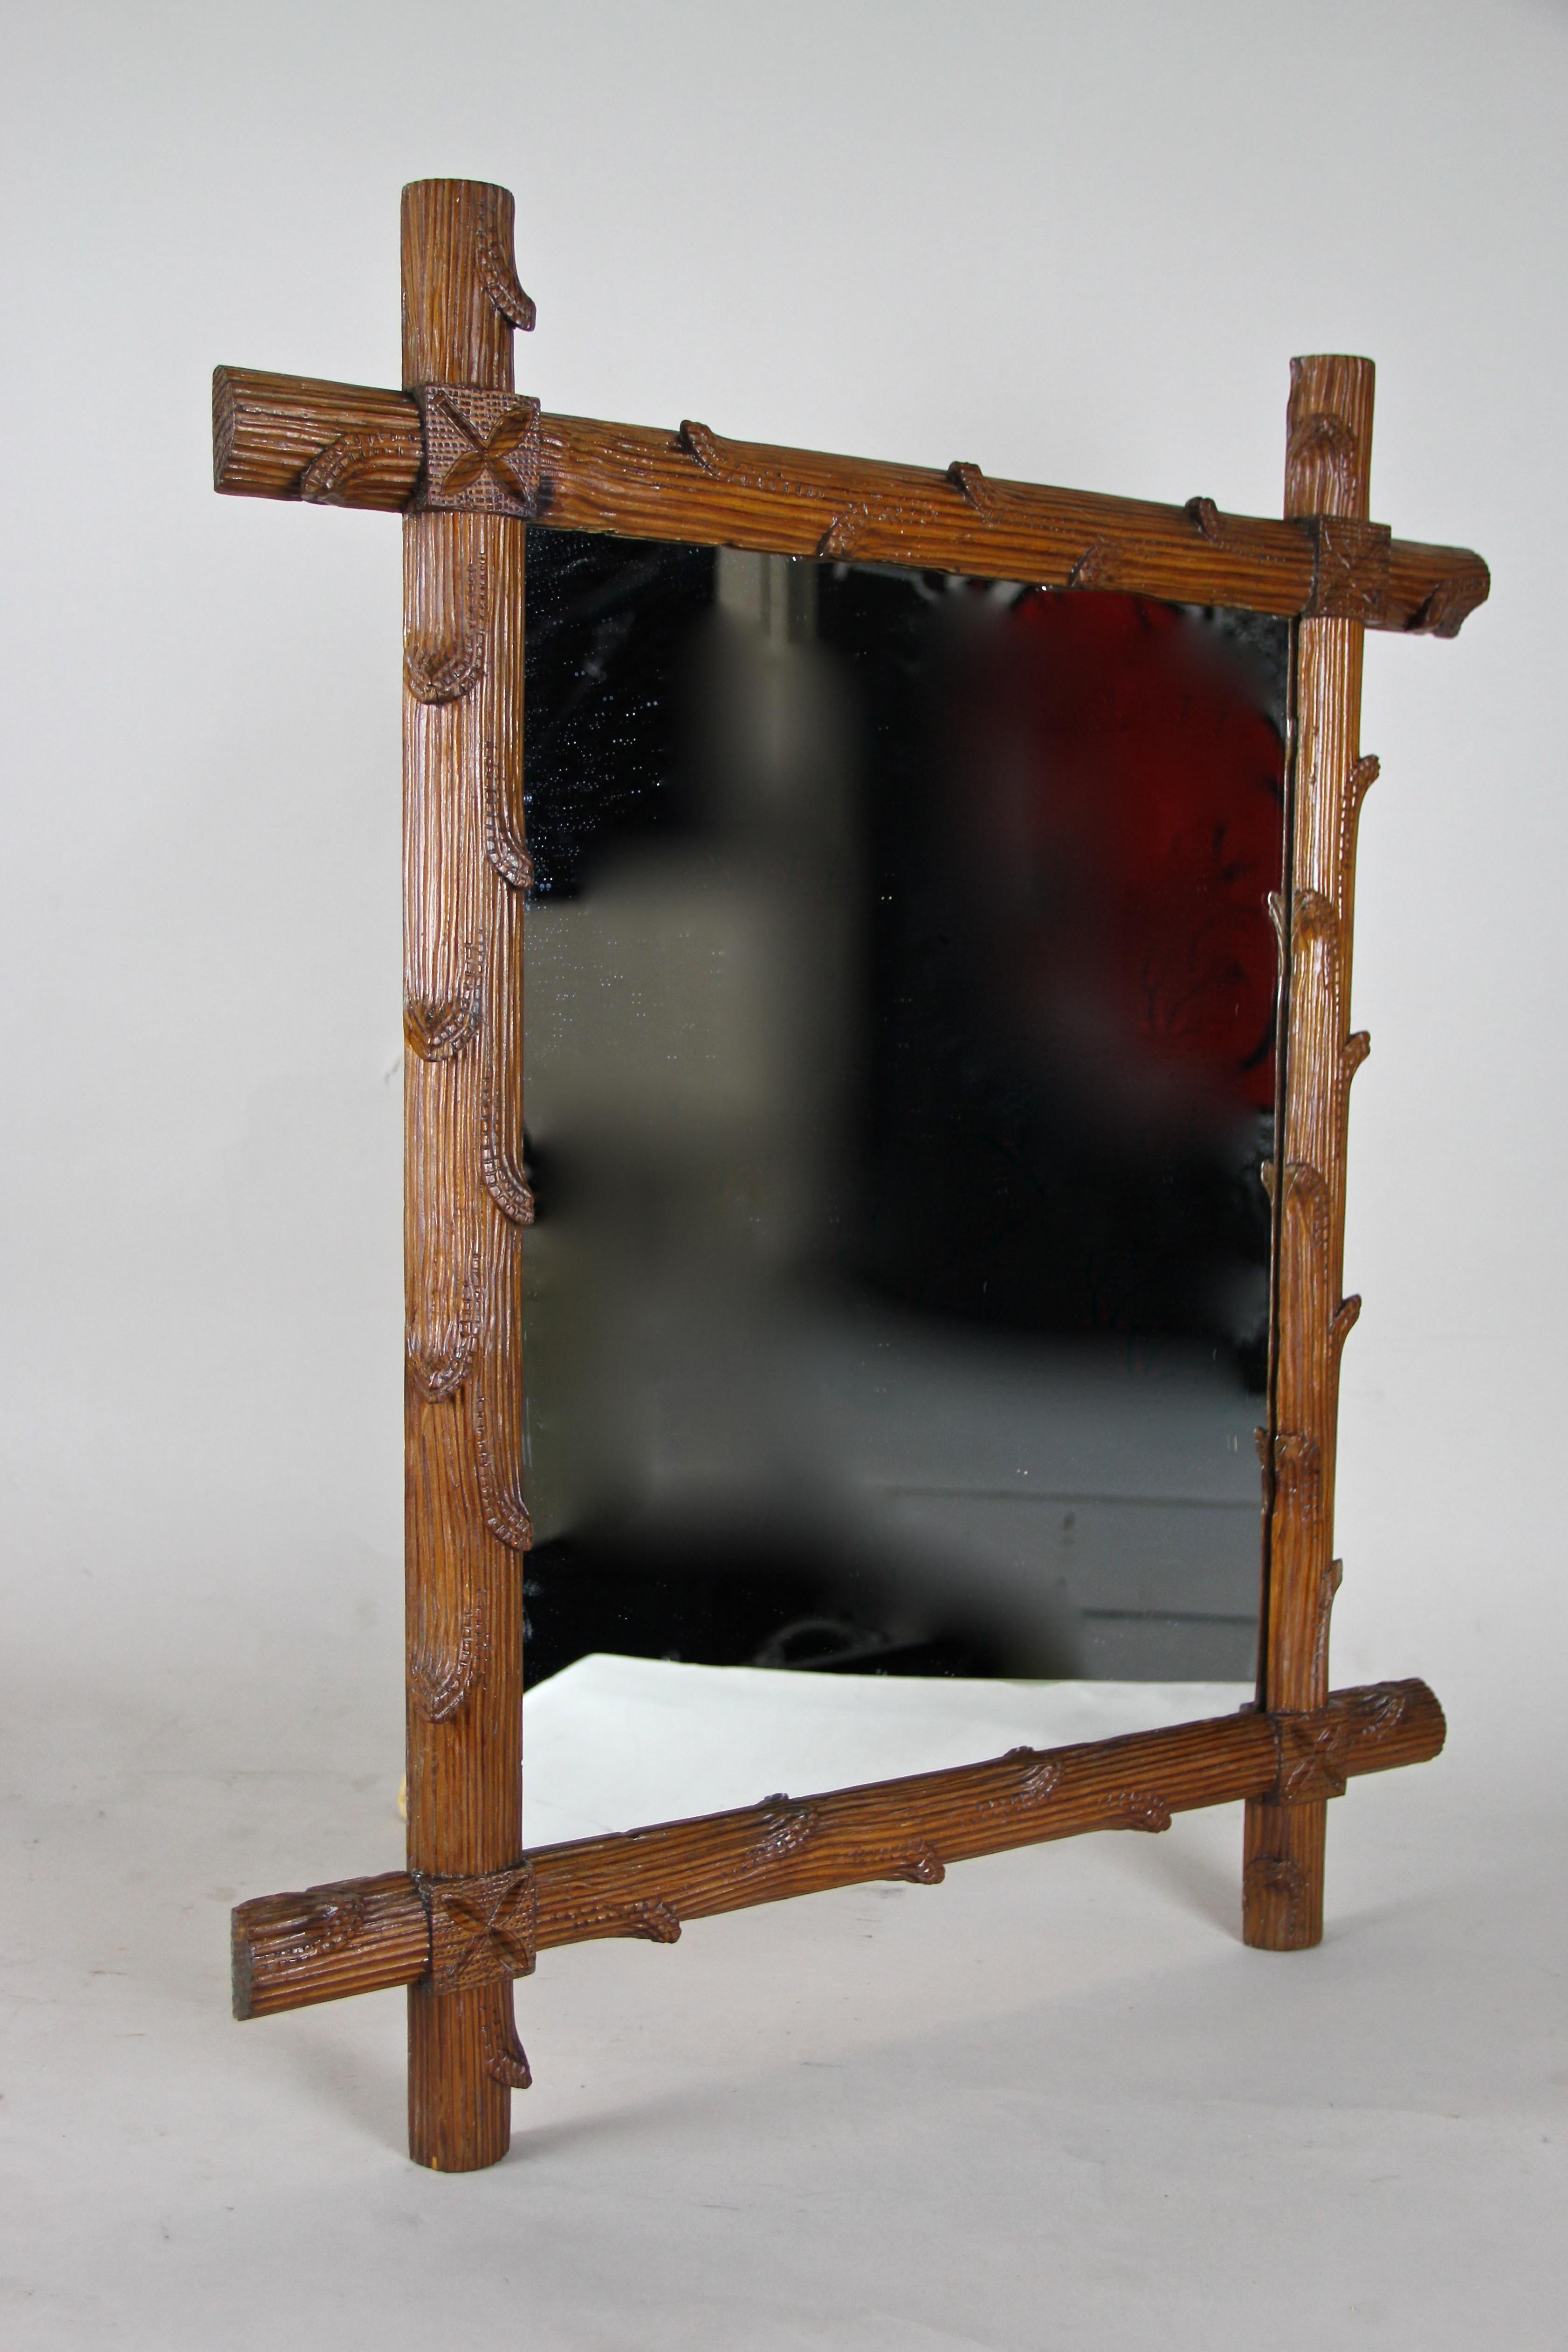 Fantastic hand carved mirror from Austria, circa 1870. This rustic black forest wall mirror has been effortfully hand carved out of basswood in the manner of tree branches showing a light-brown surface, sealed by a light shellac finish. The mirror